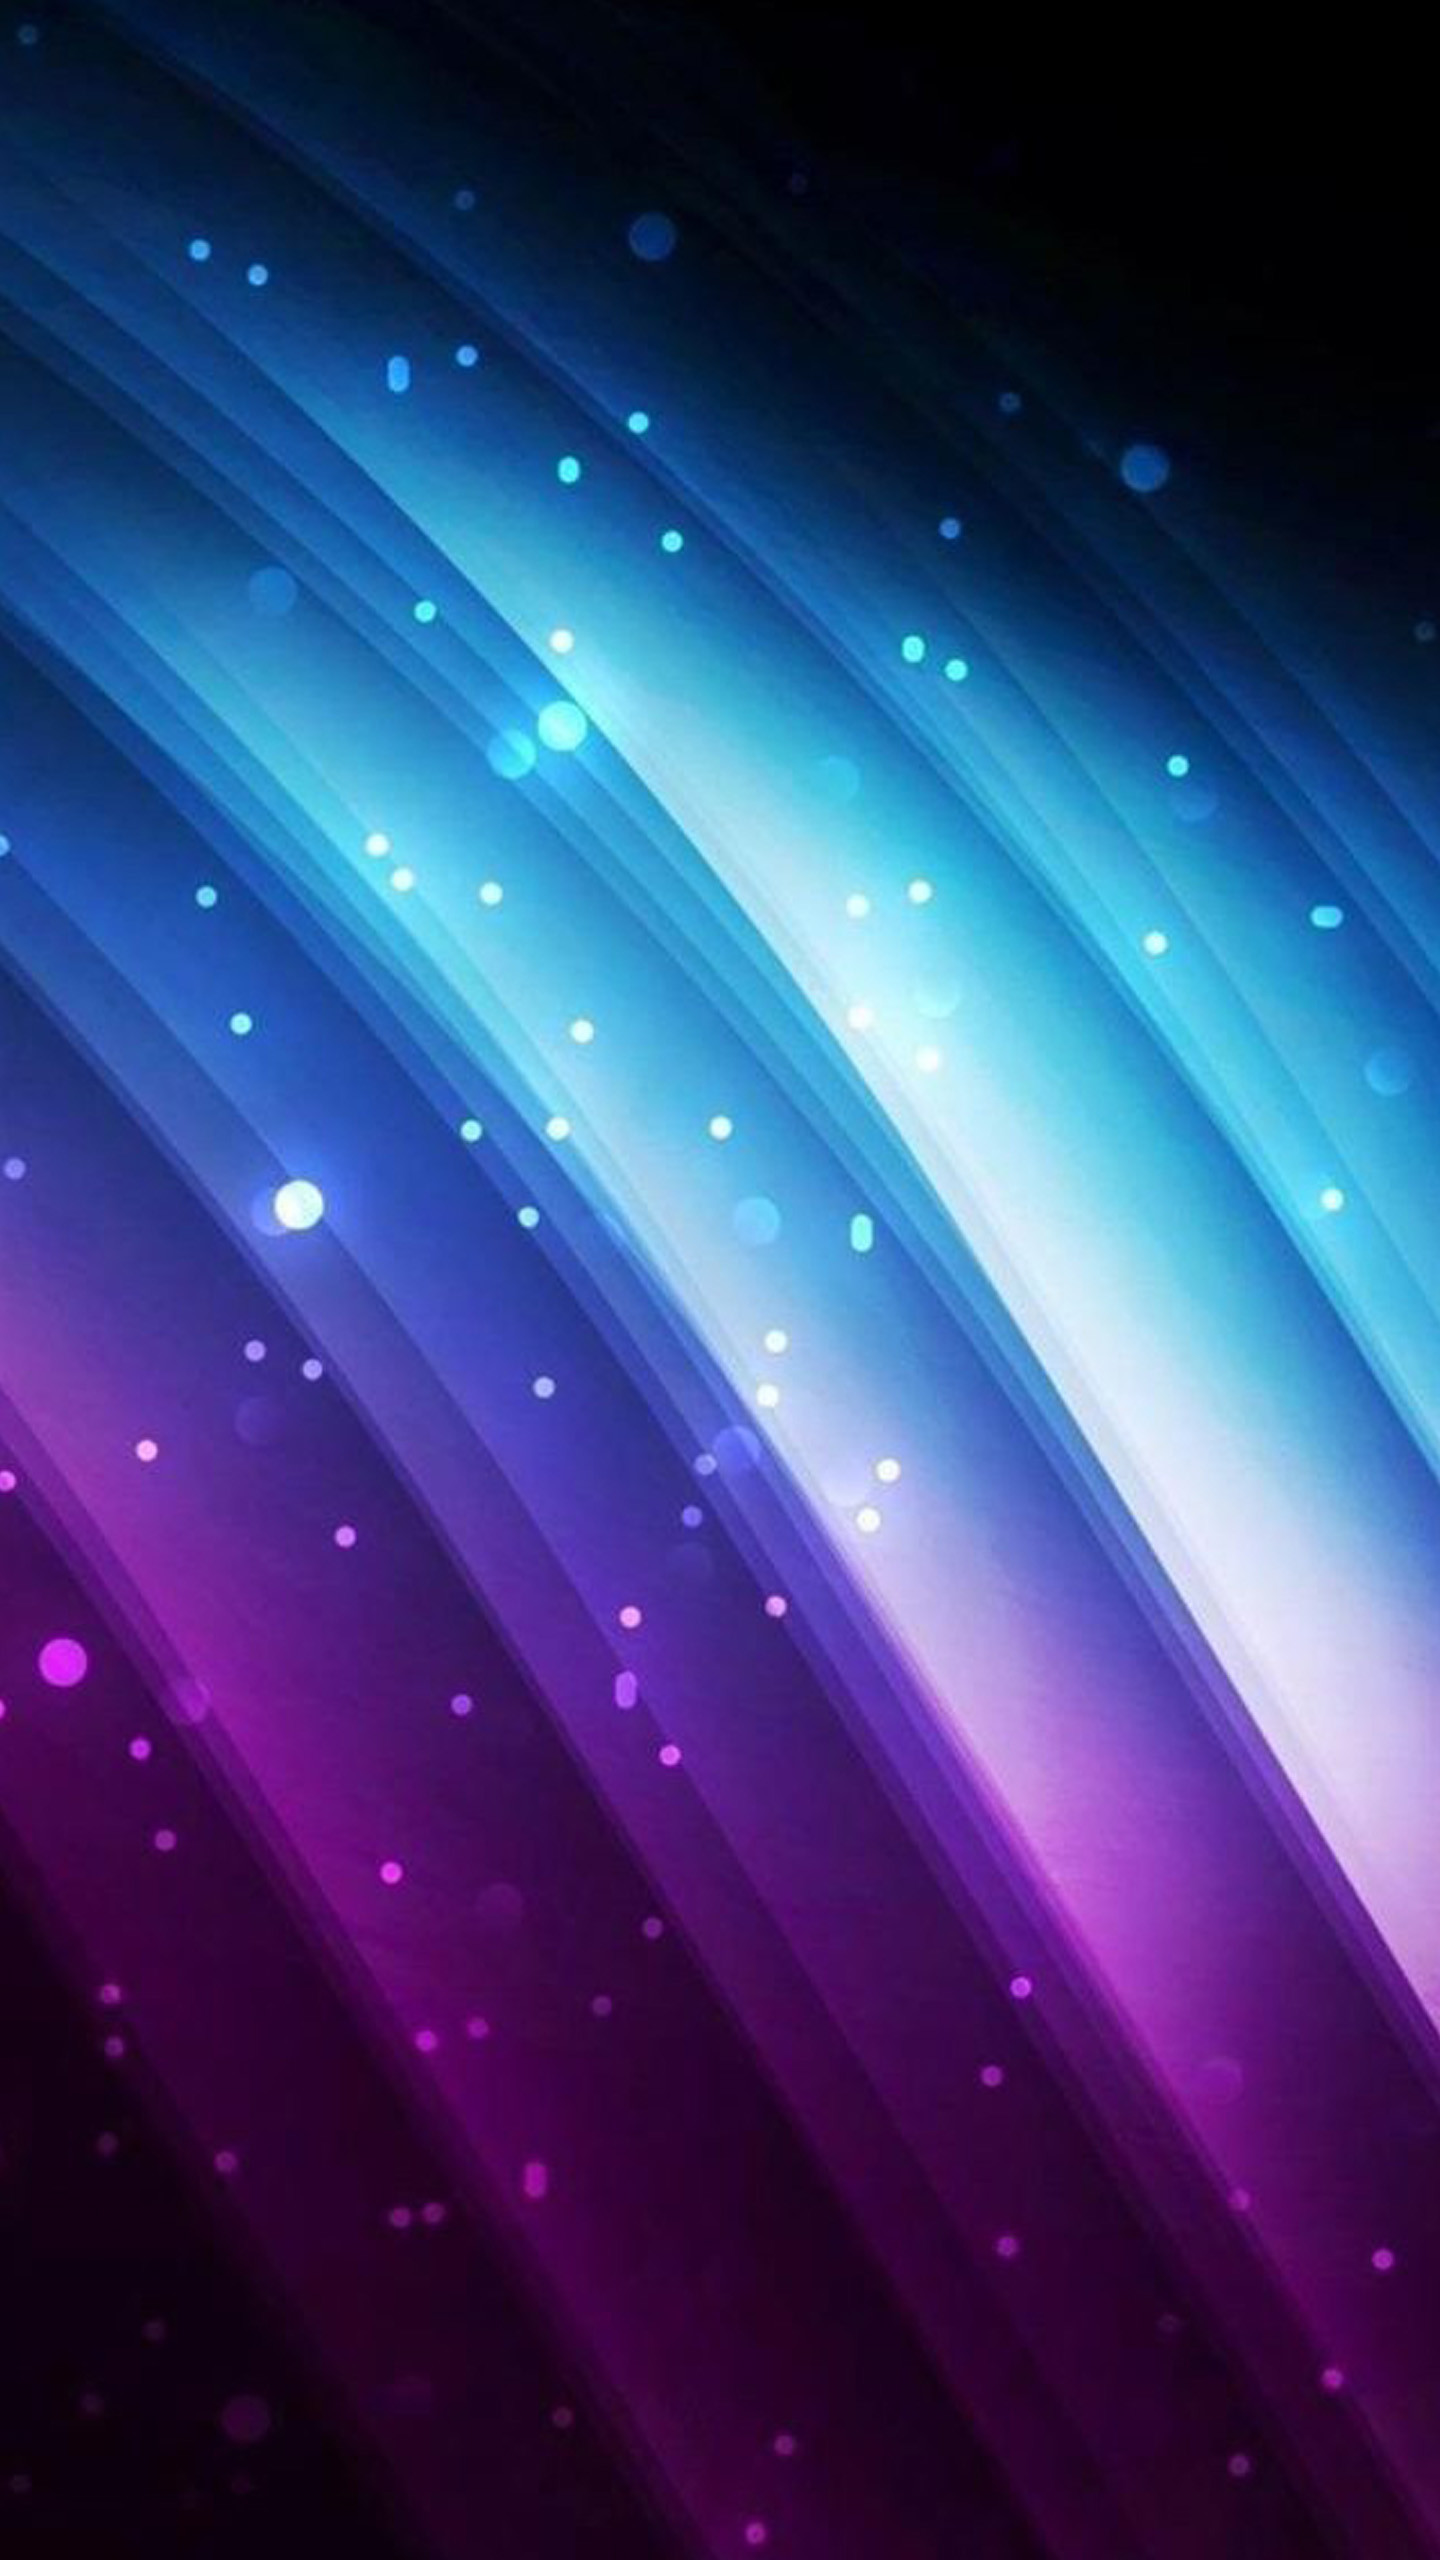 1440x2560 Abstract Purple And Blue Waves Wallpaper